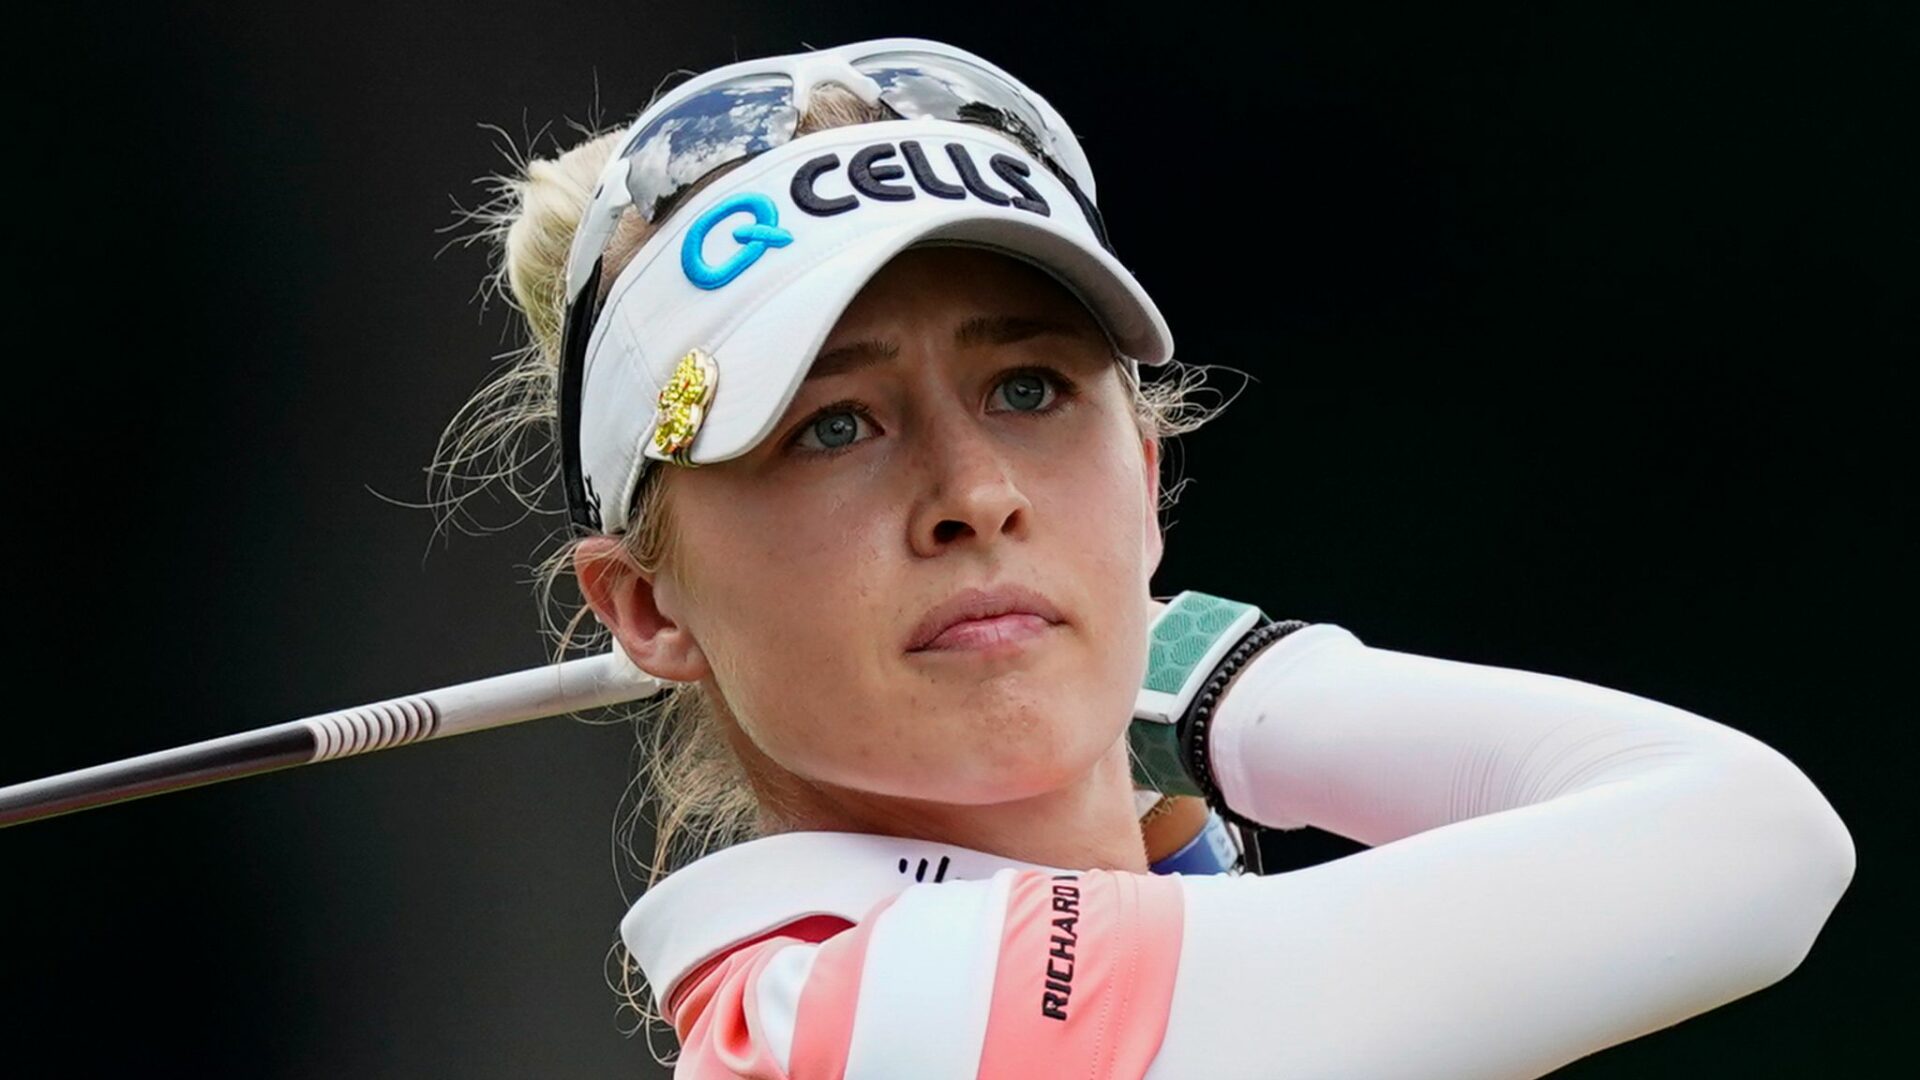 10 Amazing Facts About Nelly Korda, The American Golfer Snarkd